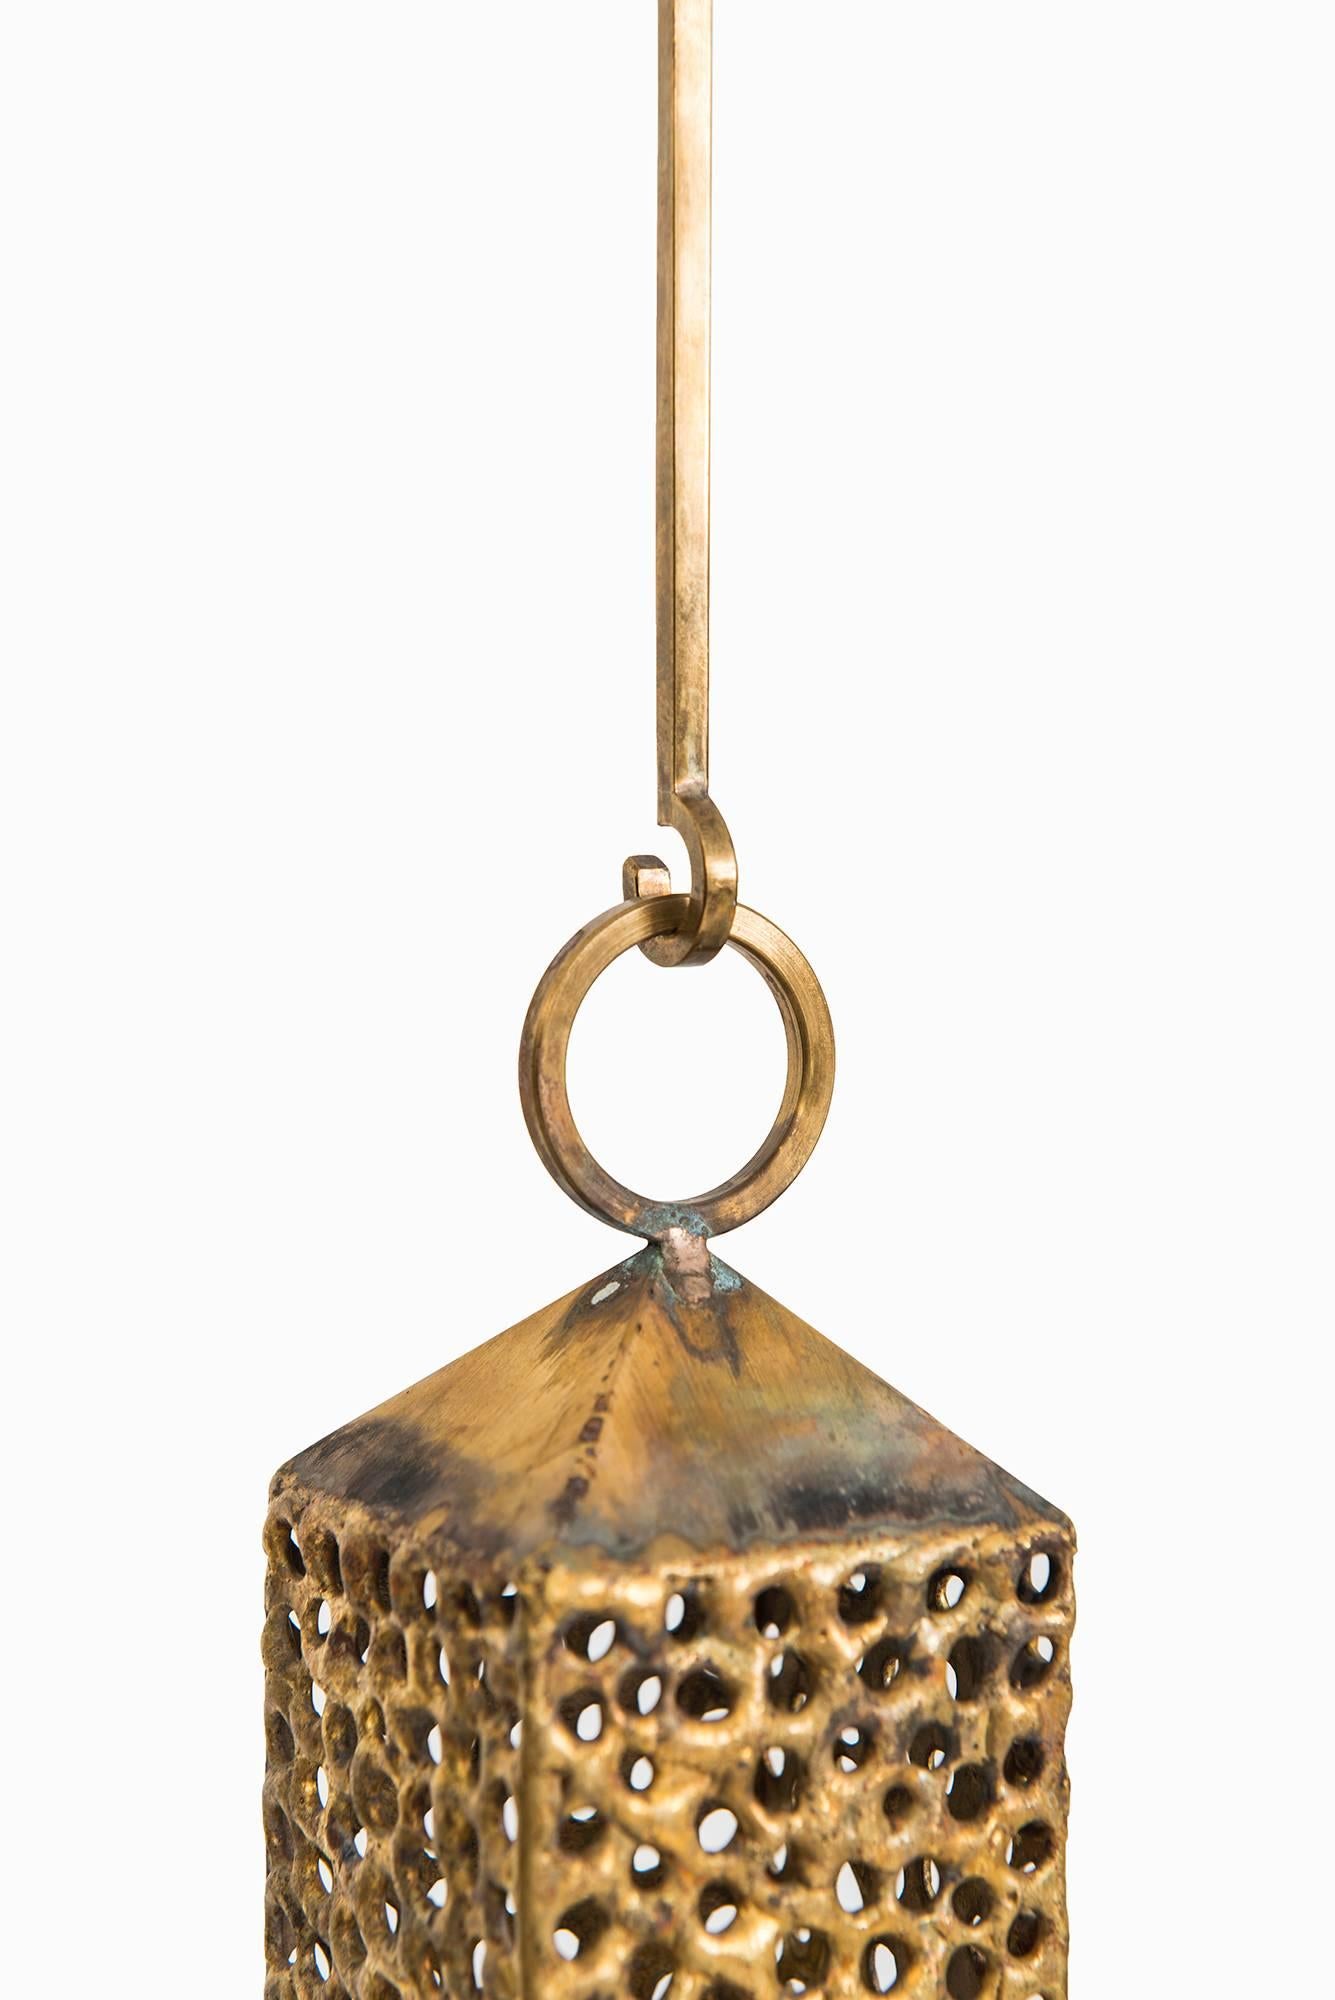 Rare hanging lantern in brass designed by Pierre Forsell. Produced by Skultuna in Sweden.